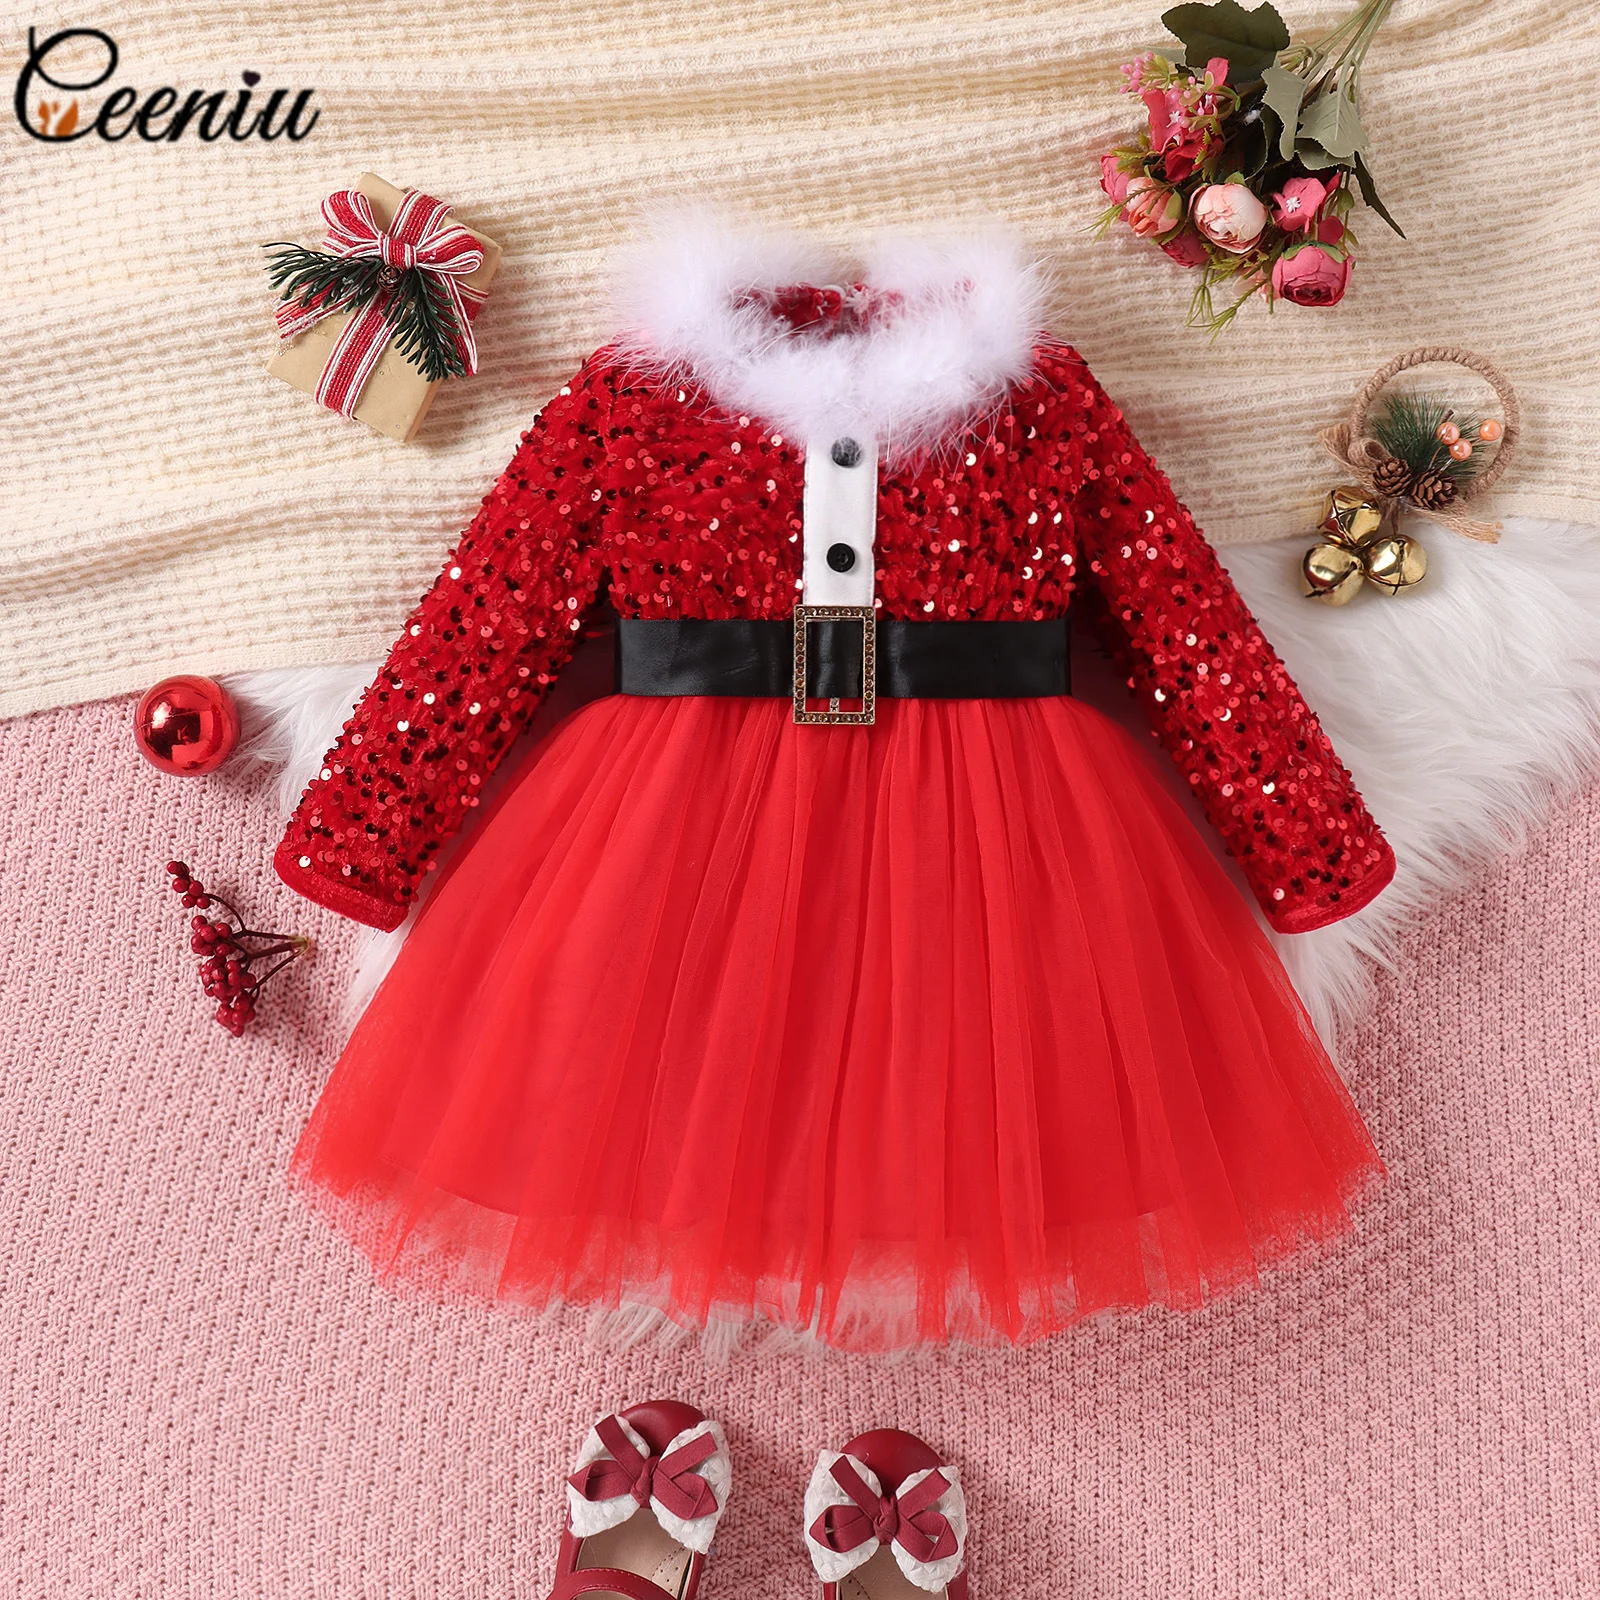 

Ceeniu 0-5Y Fall Winter Baby Toddler Christmas Costume Red Sequins Dress For New Year Clothes Party Christmas Dresses For Girls